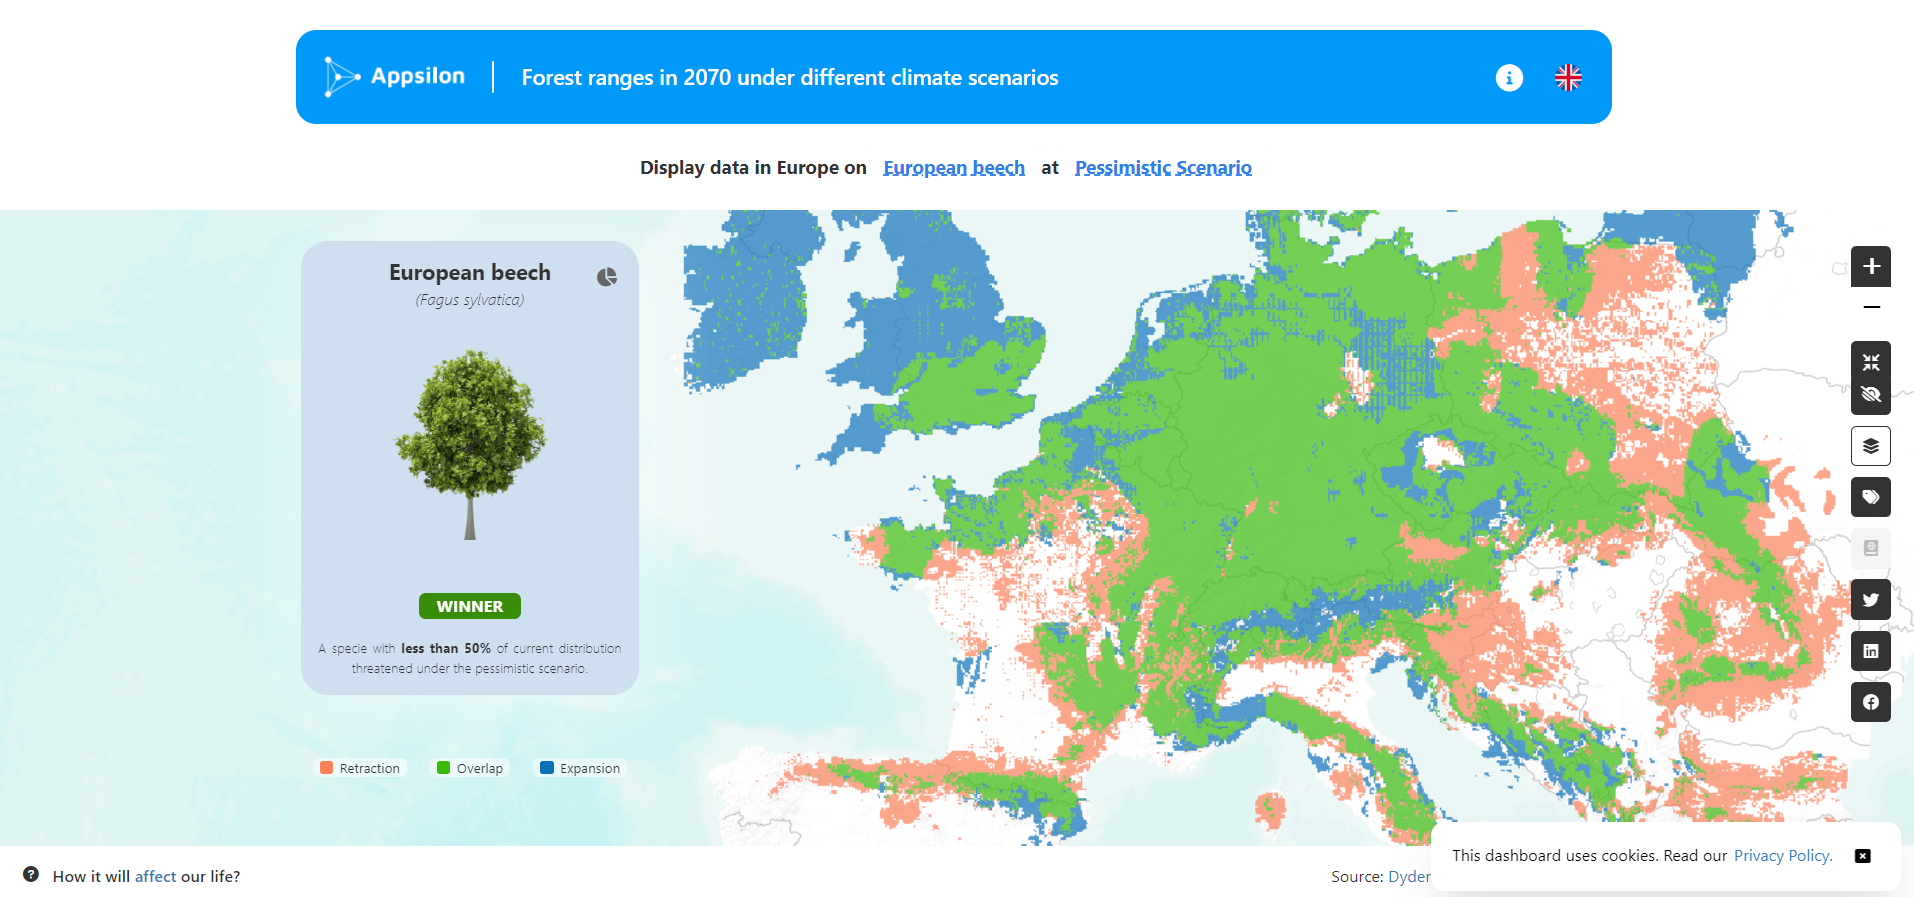 Shiny dashboard view of the future of European forest ranges 